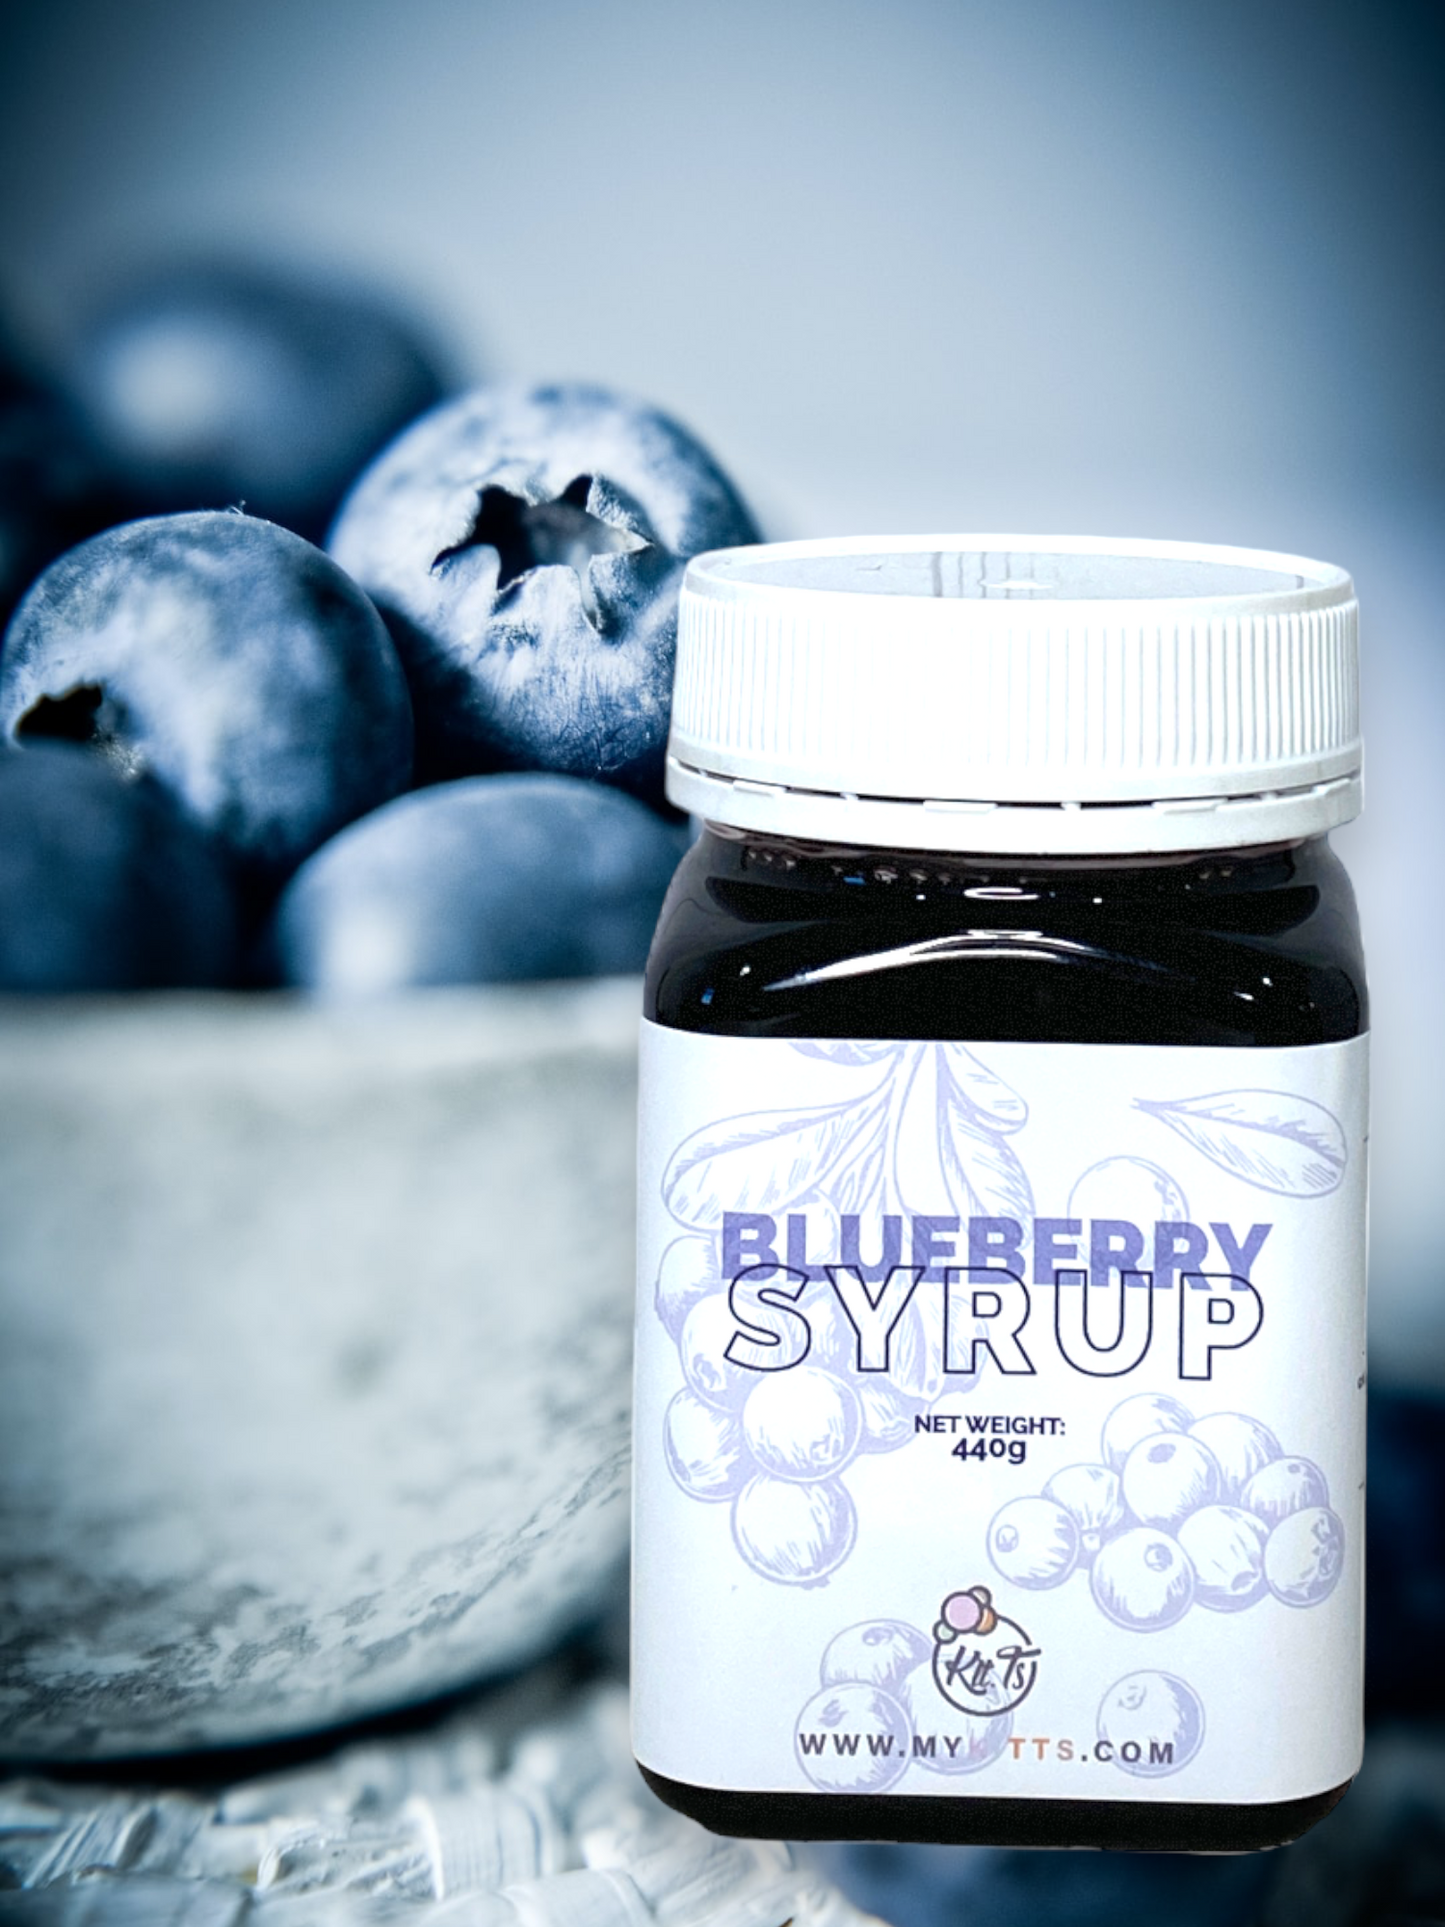 Blueberry Syrup 440g